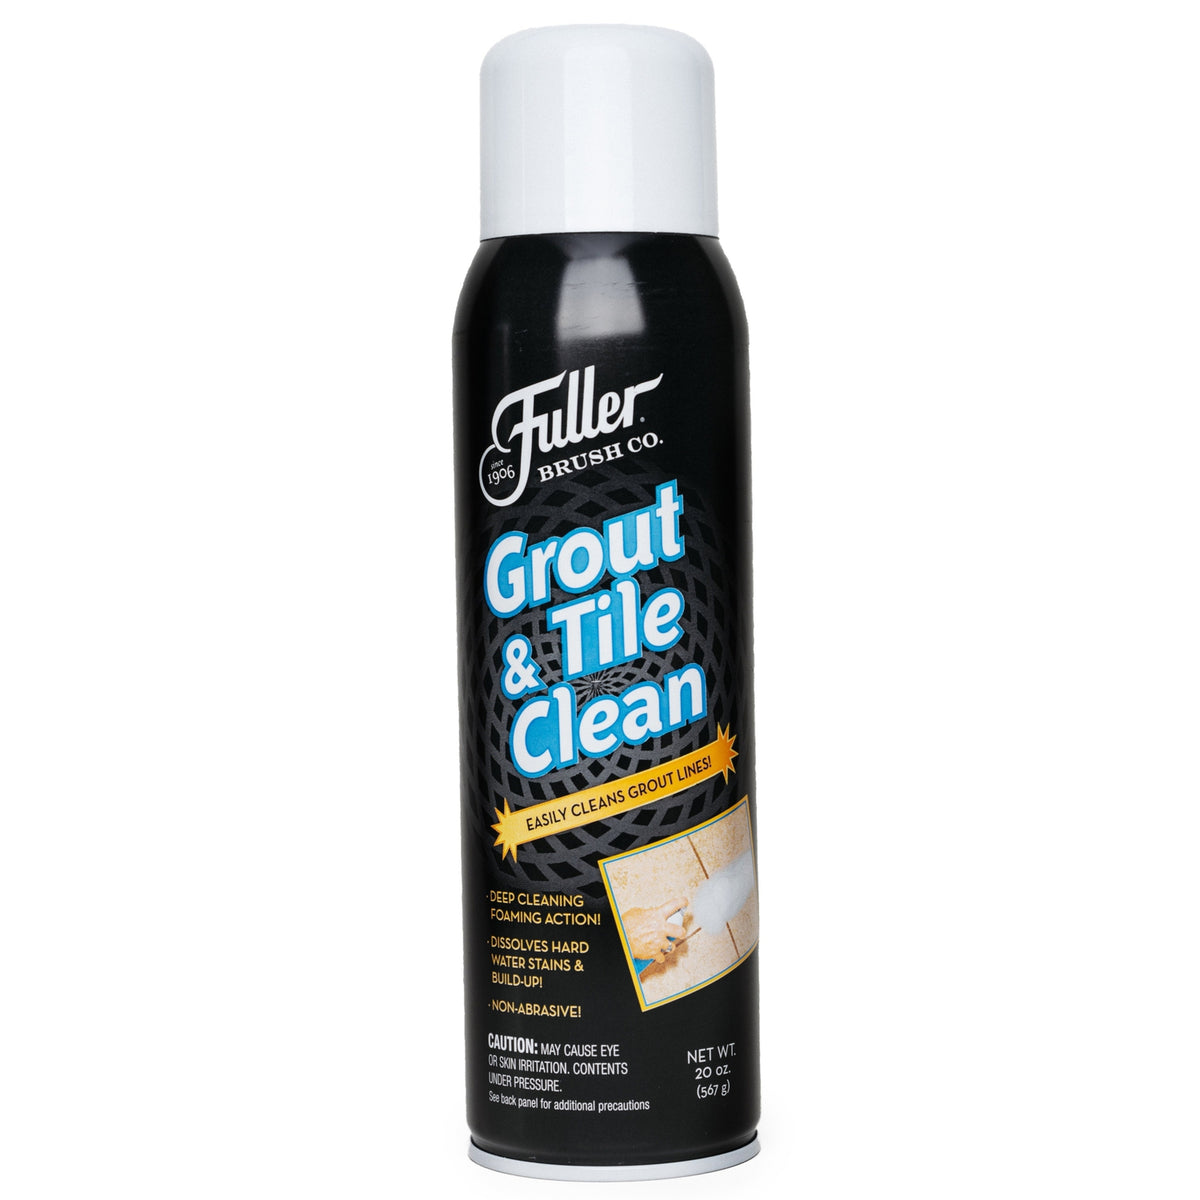 Hall- Premium Tile & Grout Cleaning – Floor Care